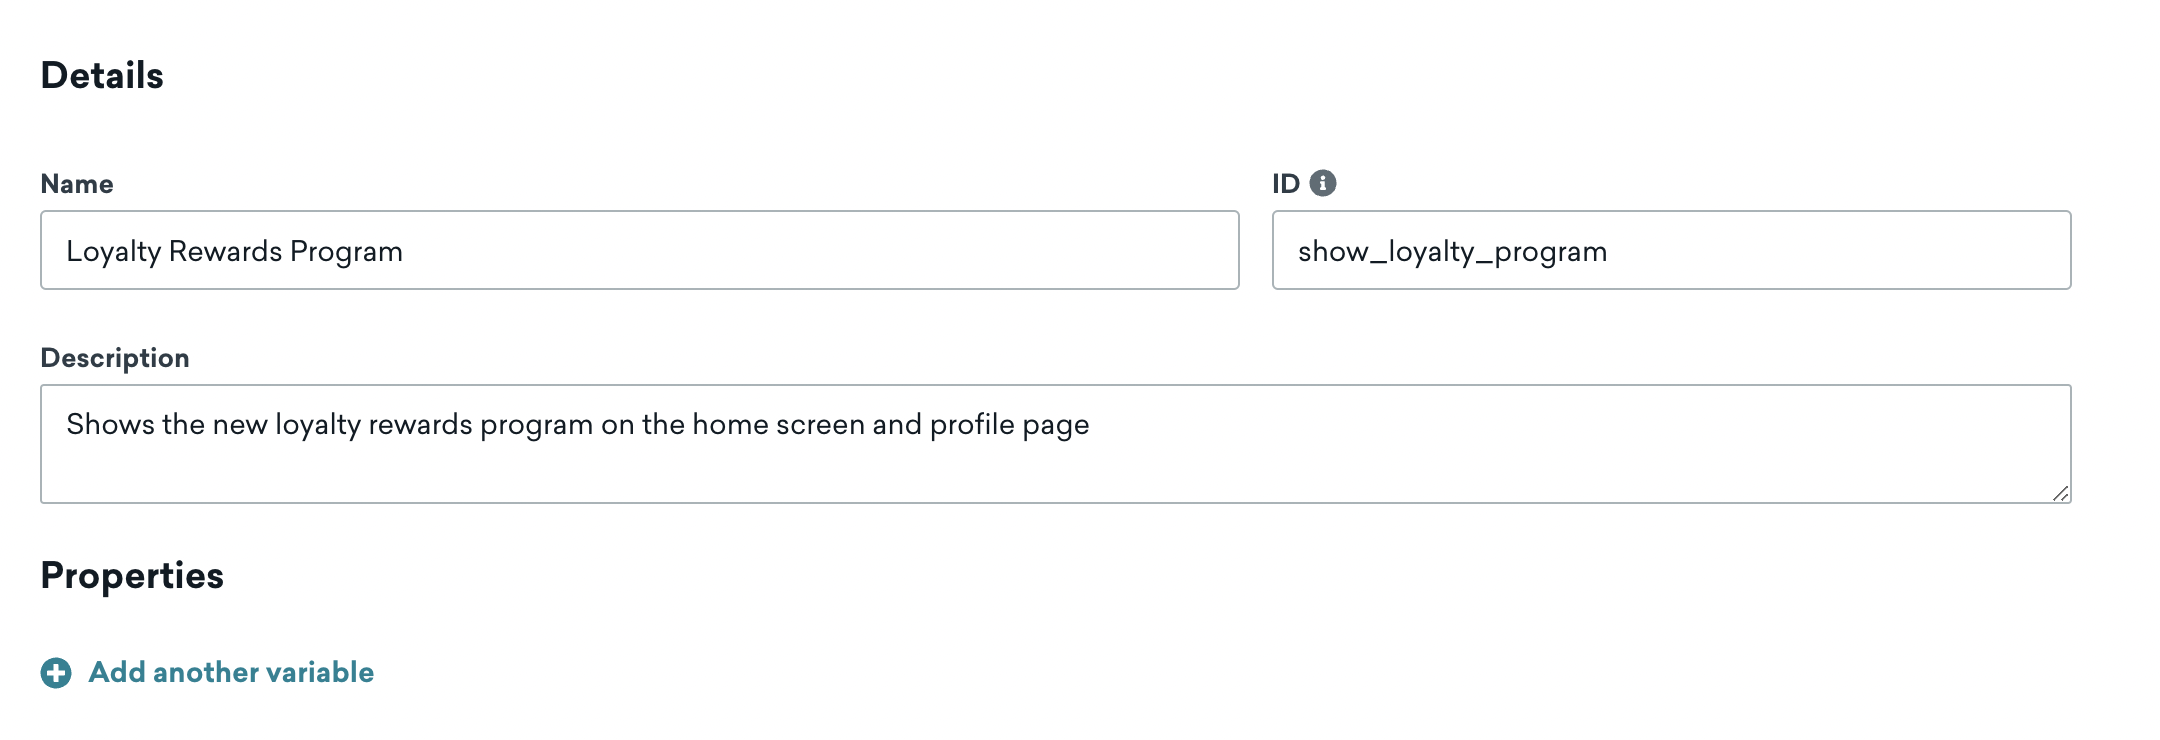 A feature flag named "show_loyalty_program"